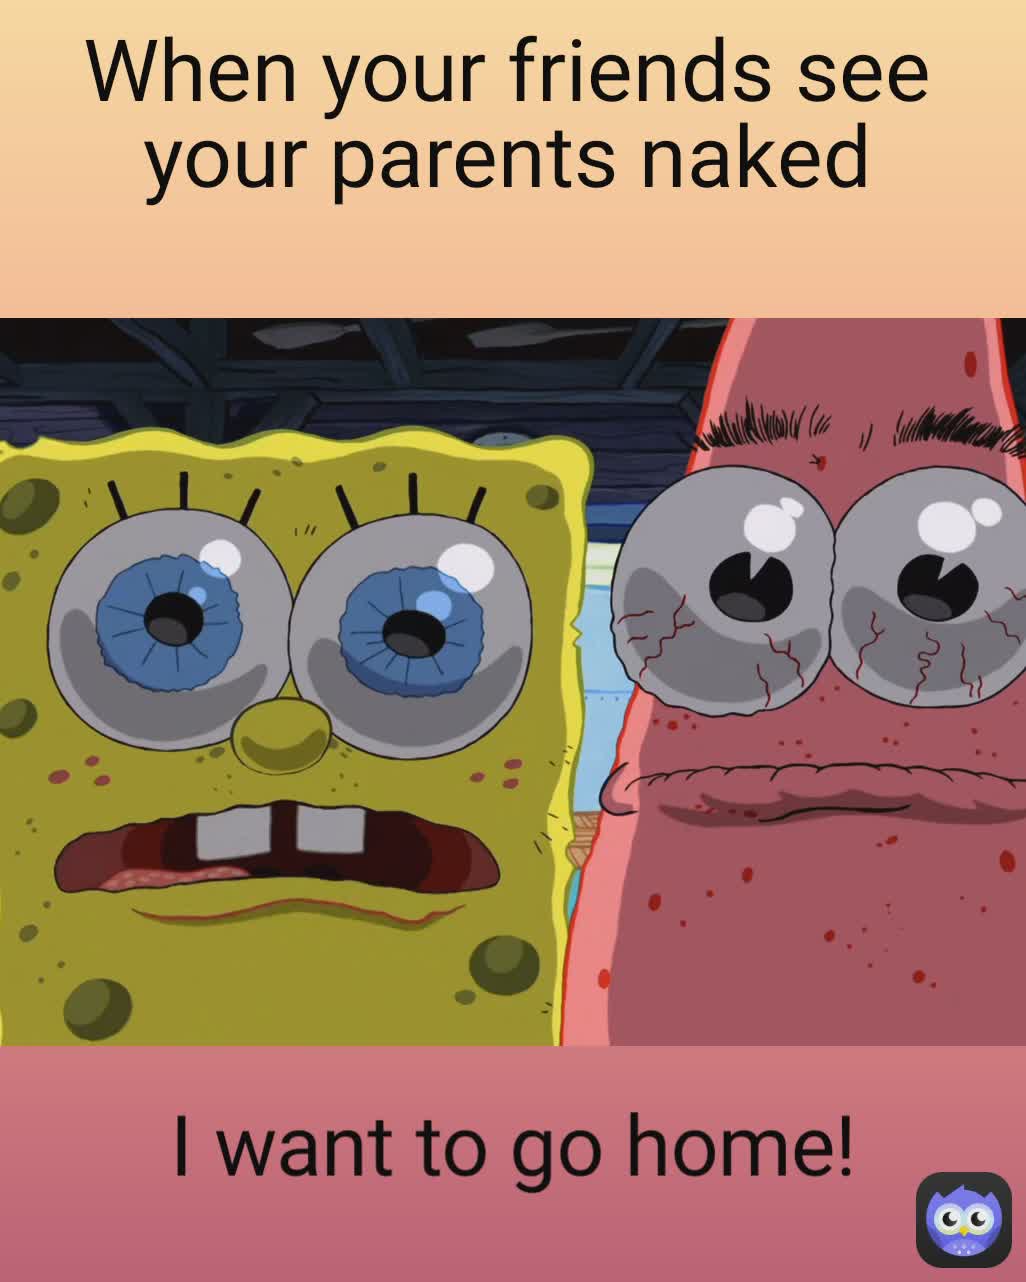 I want to go home! When your friends see your parents naked